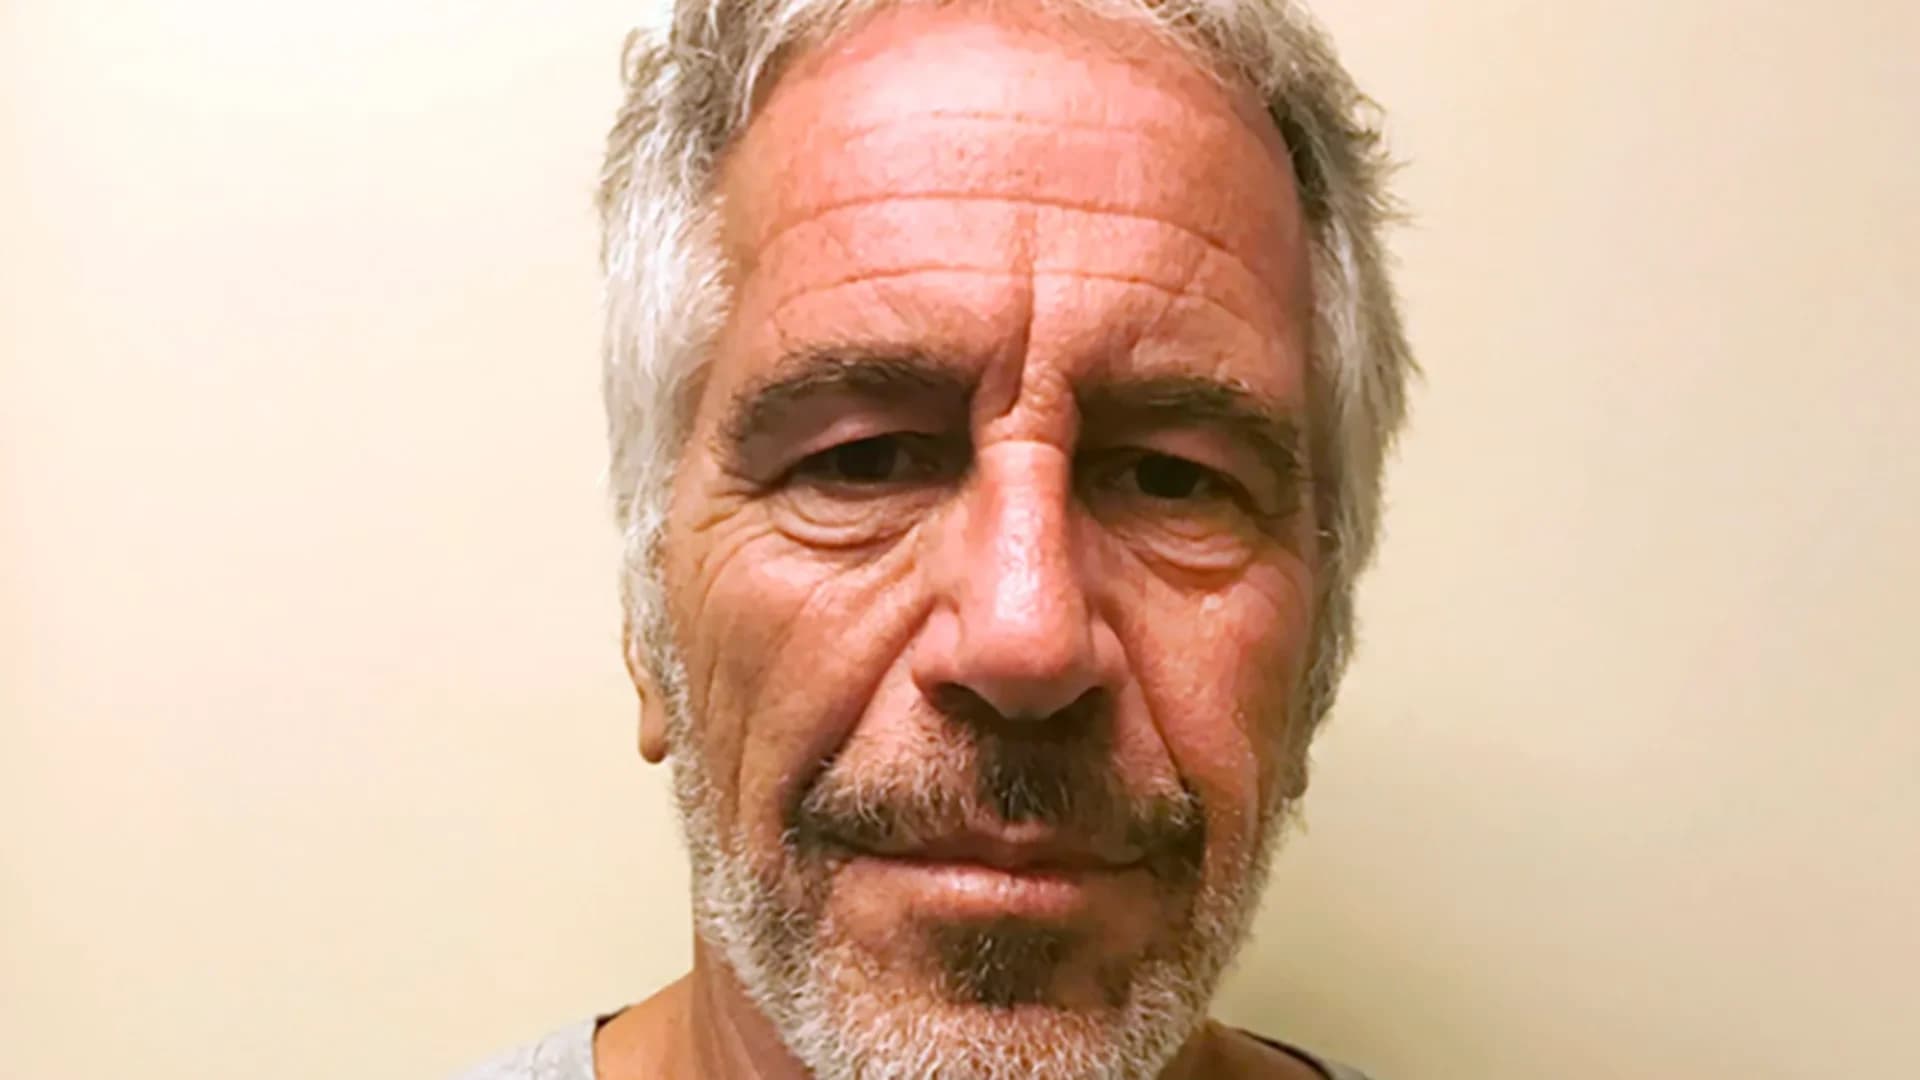 Medical examiner confirms Epstein death a suicide by hanging